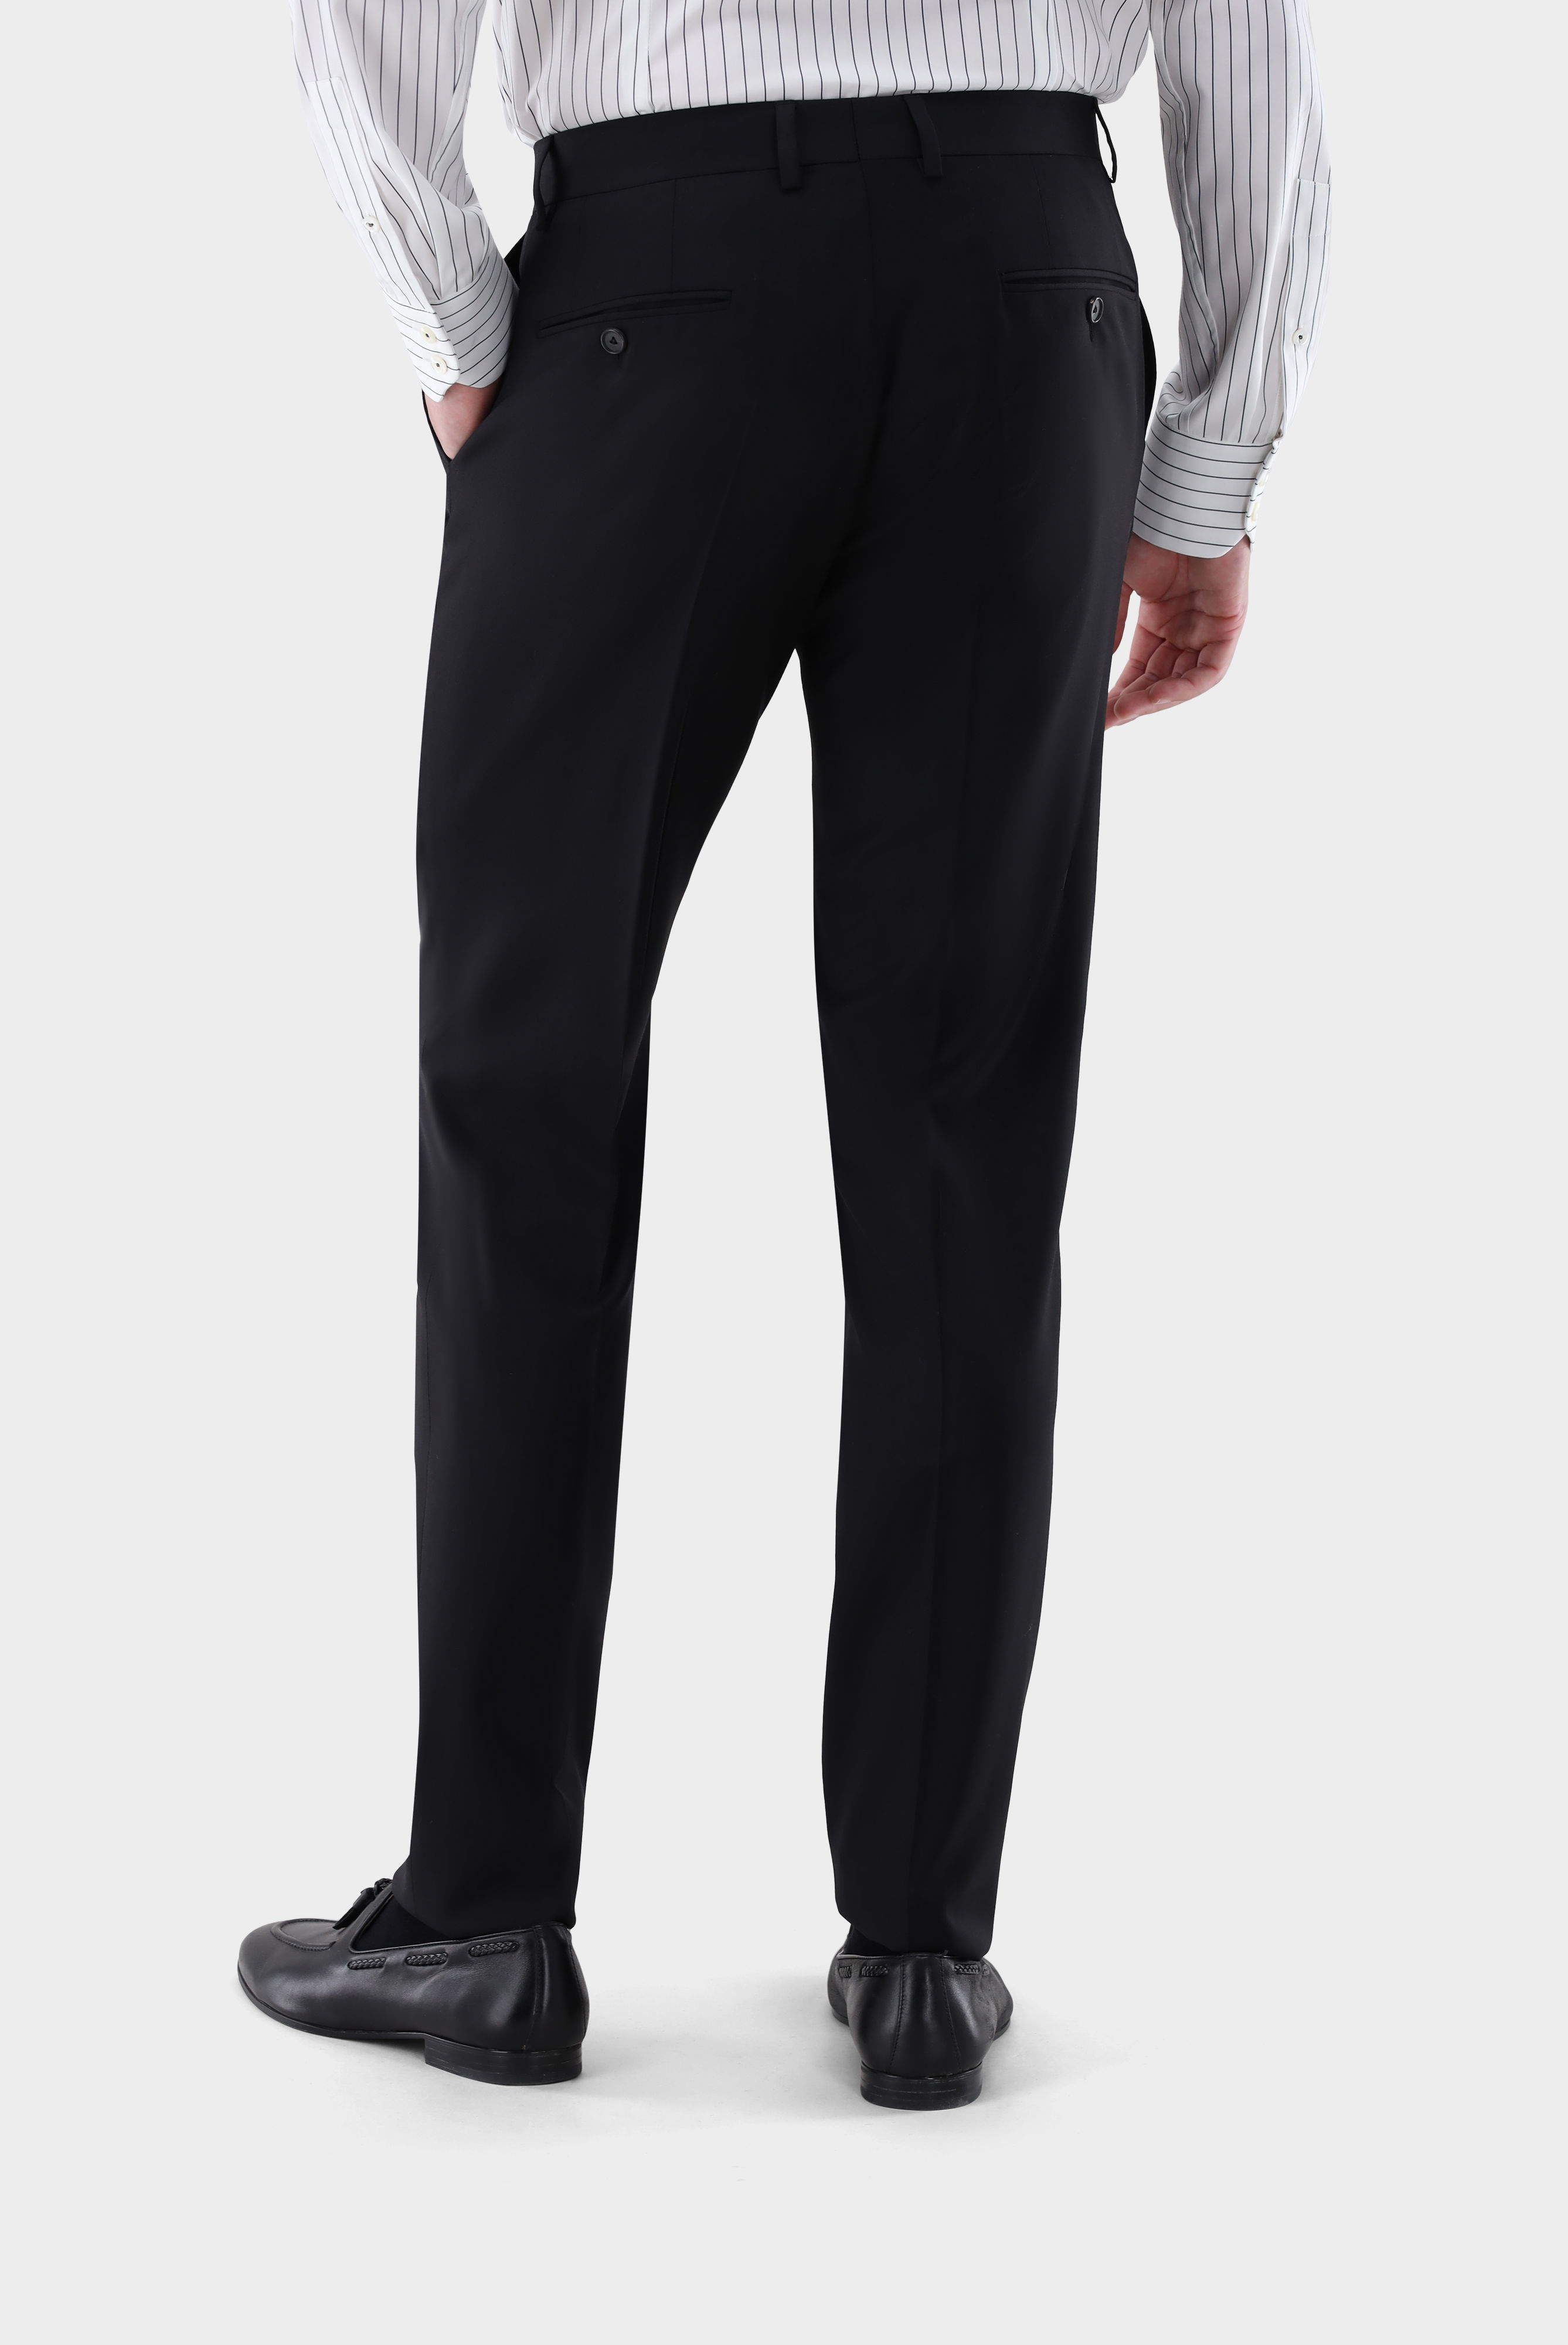 Jeans & Trousers+Wool Trousers Slim Fit+20.7880.16.H01010.099.31